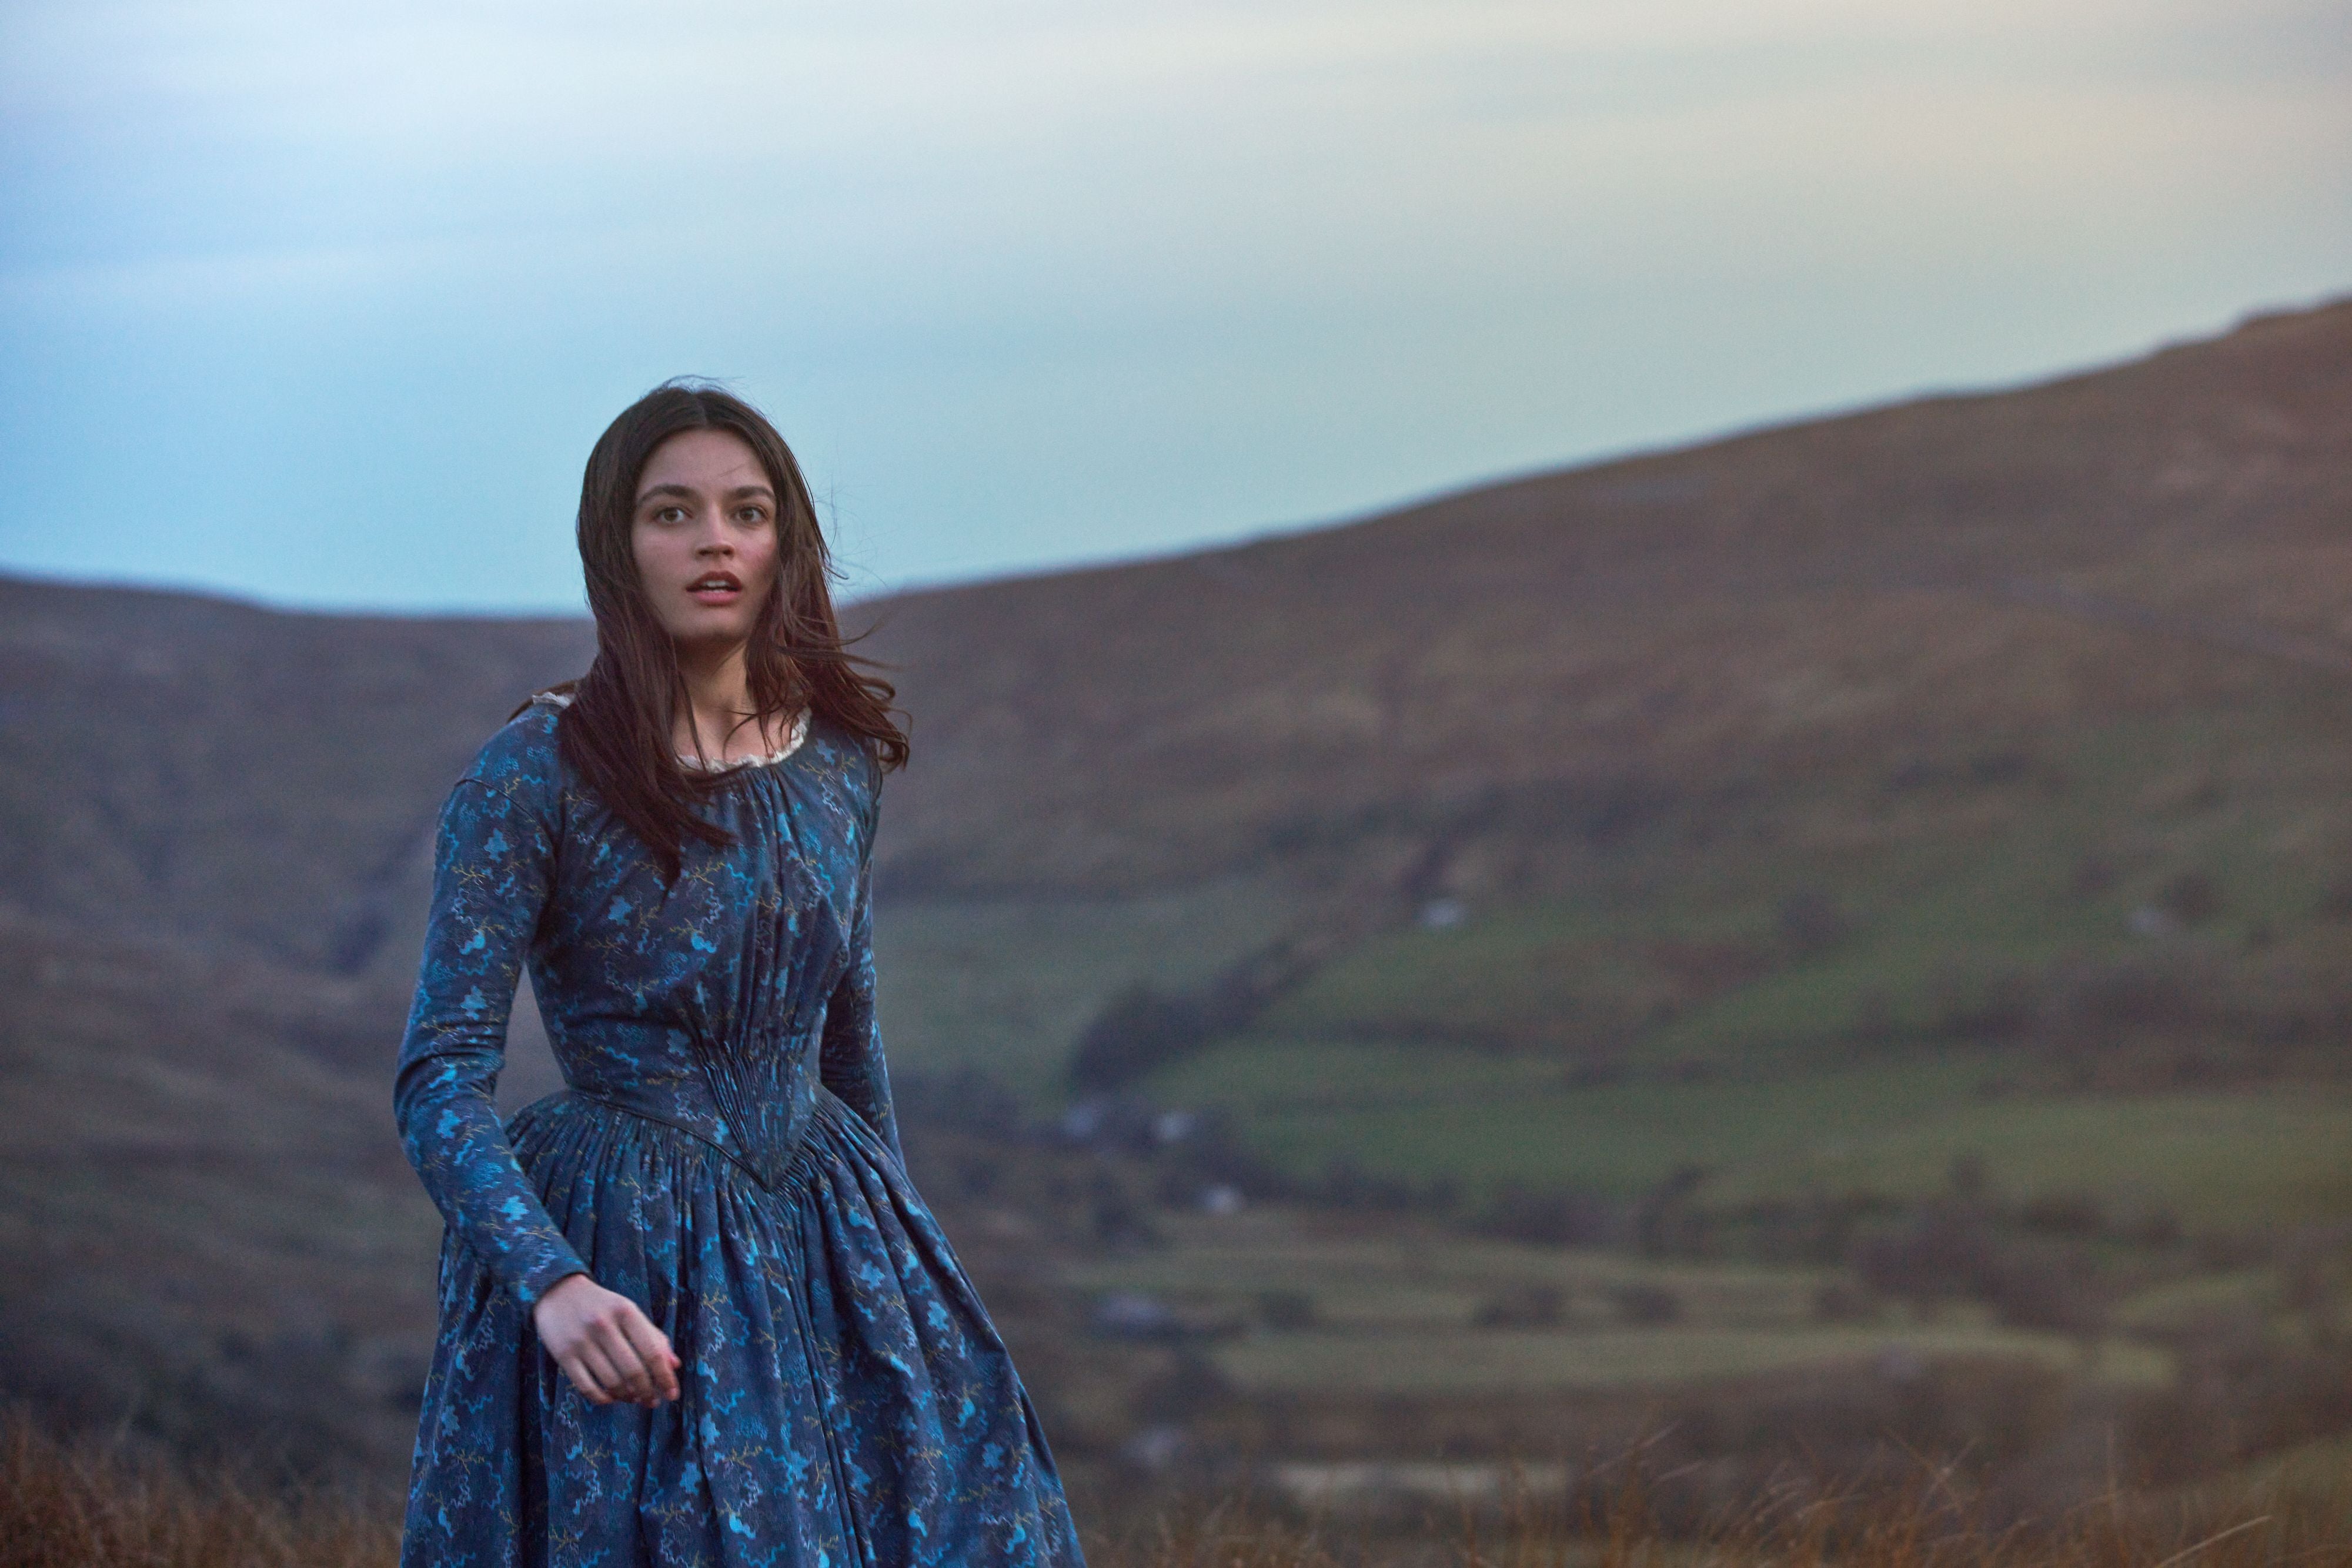 A slim attractive white woman with her long brown hair parted down the middle stands in a blue-green floral dress on a hill above the English countryside, the wind in her hair and her lips just barely parted